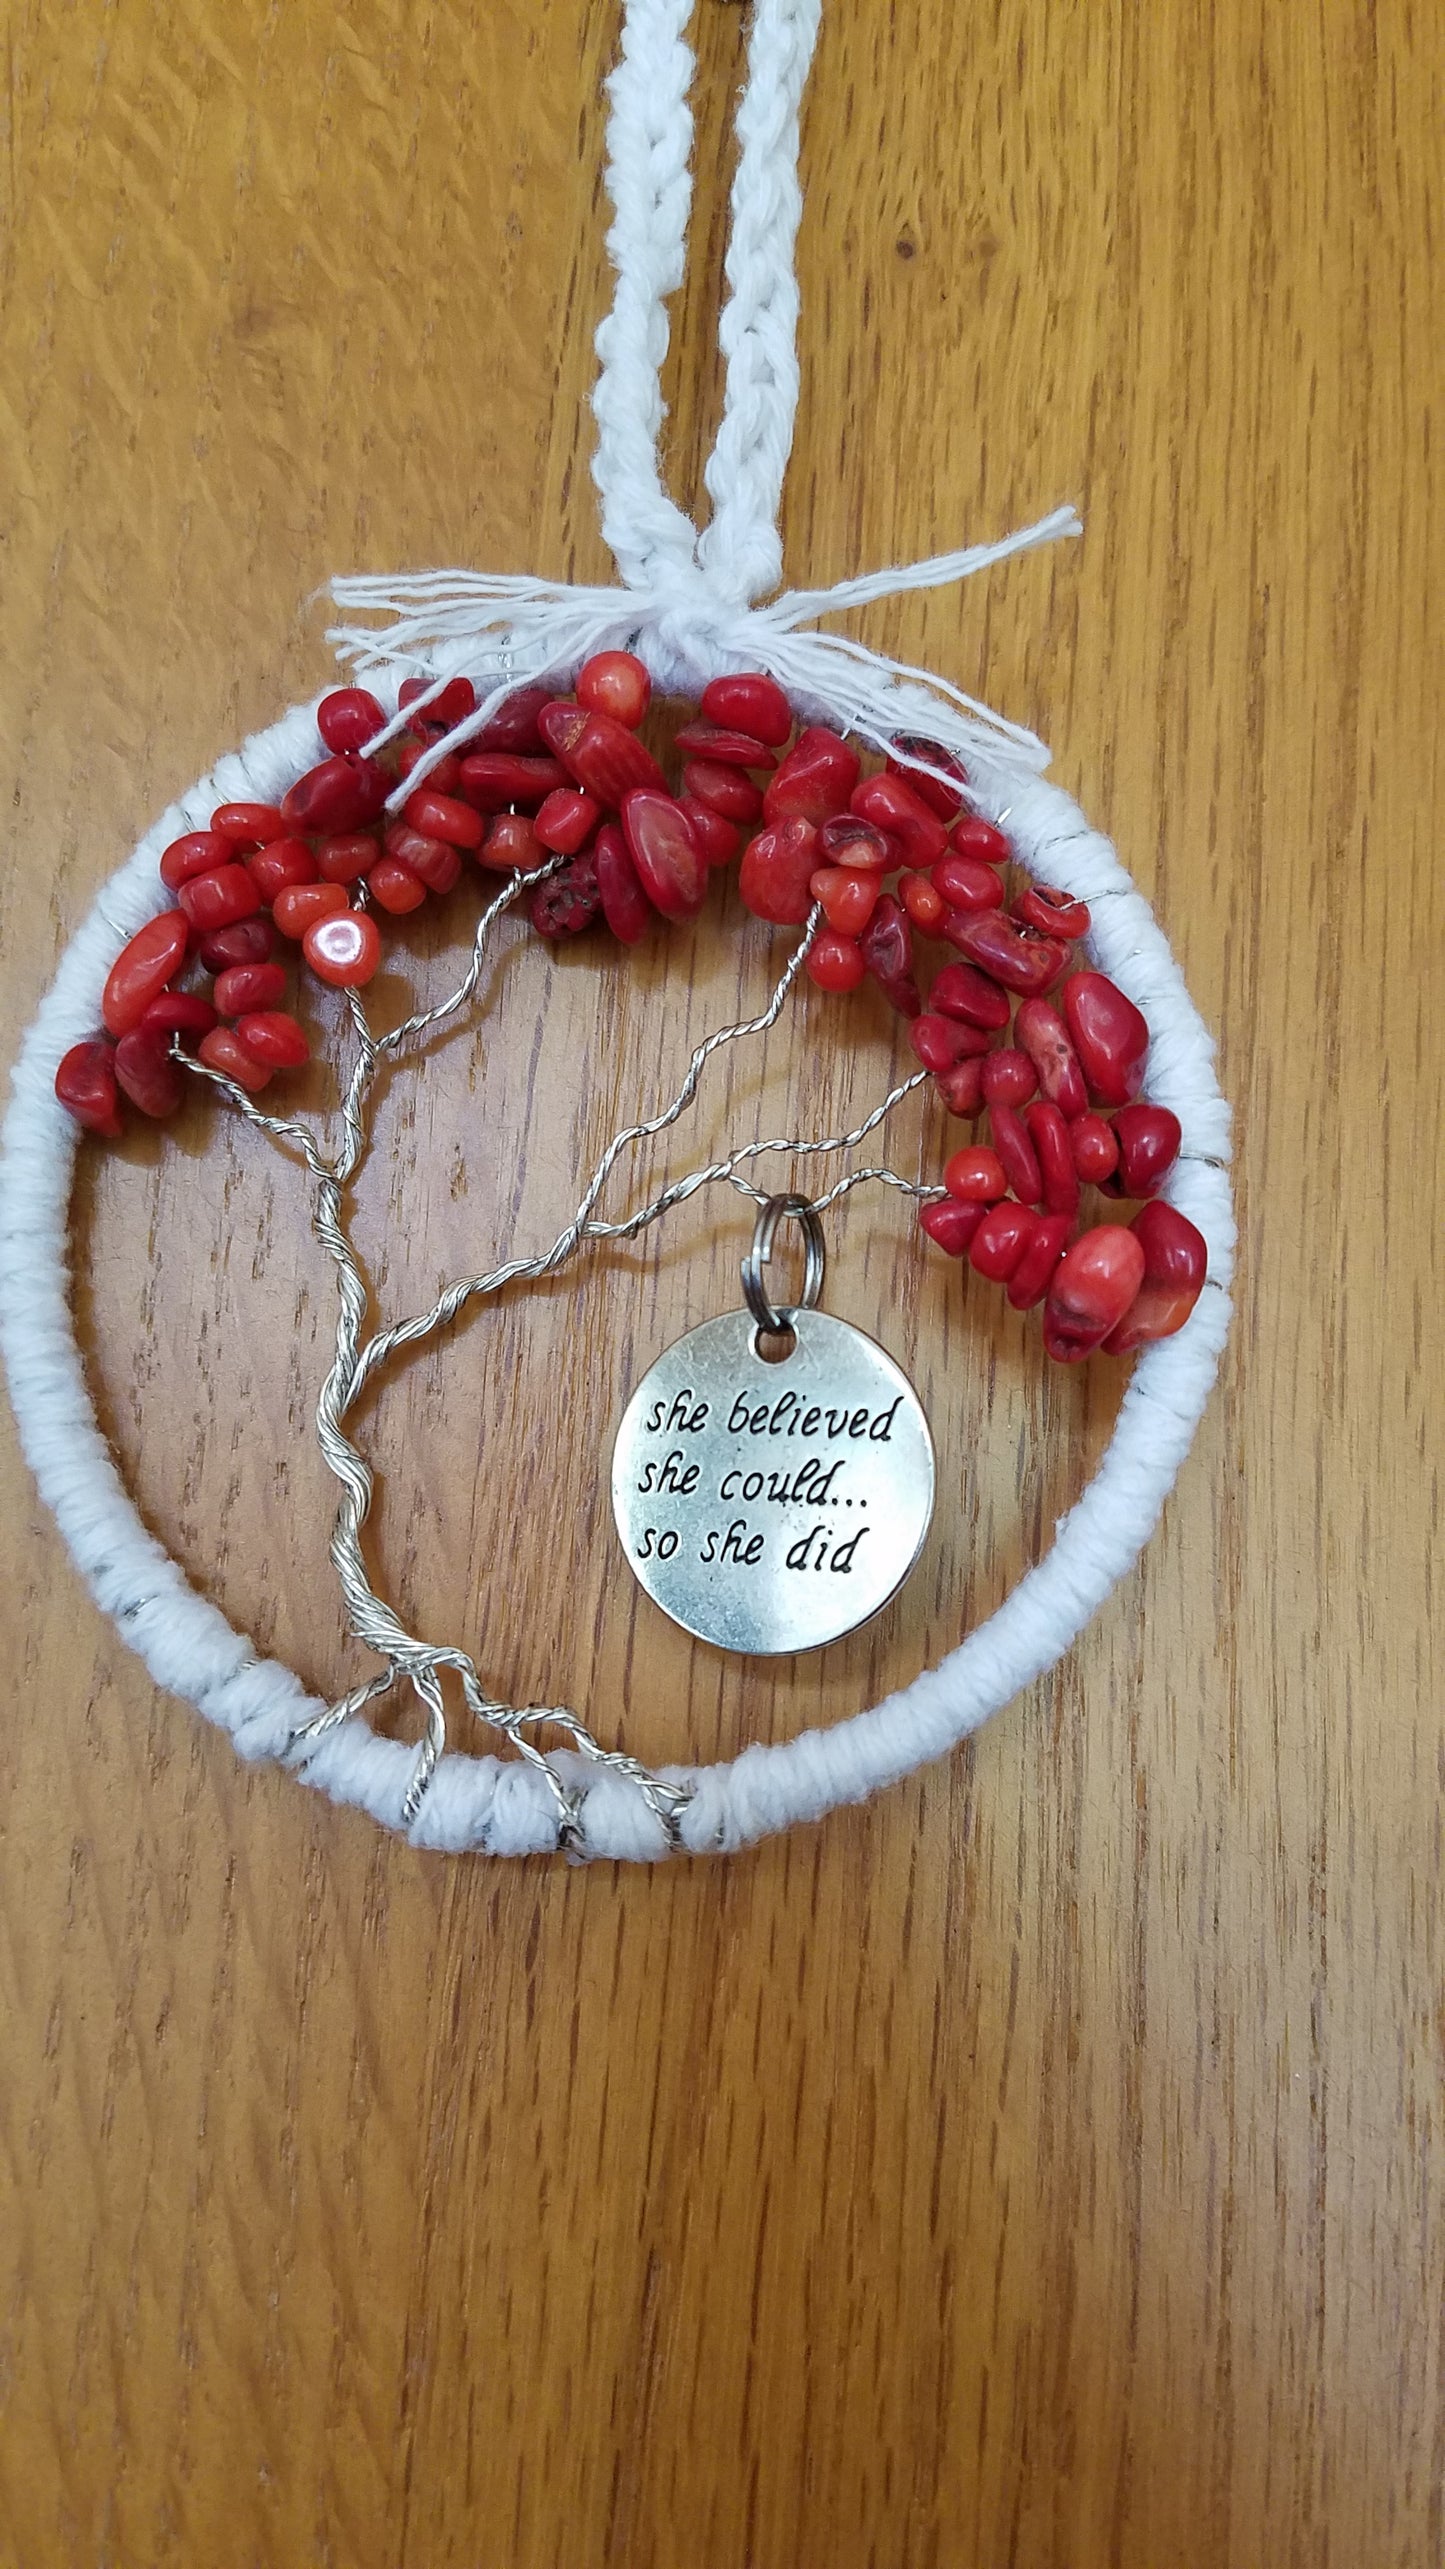 Dream Catcher Tree She Believed She Could Do She Did Red and White